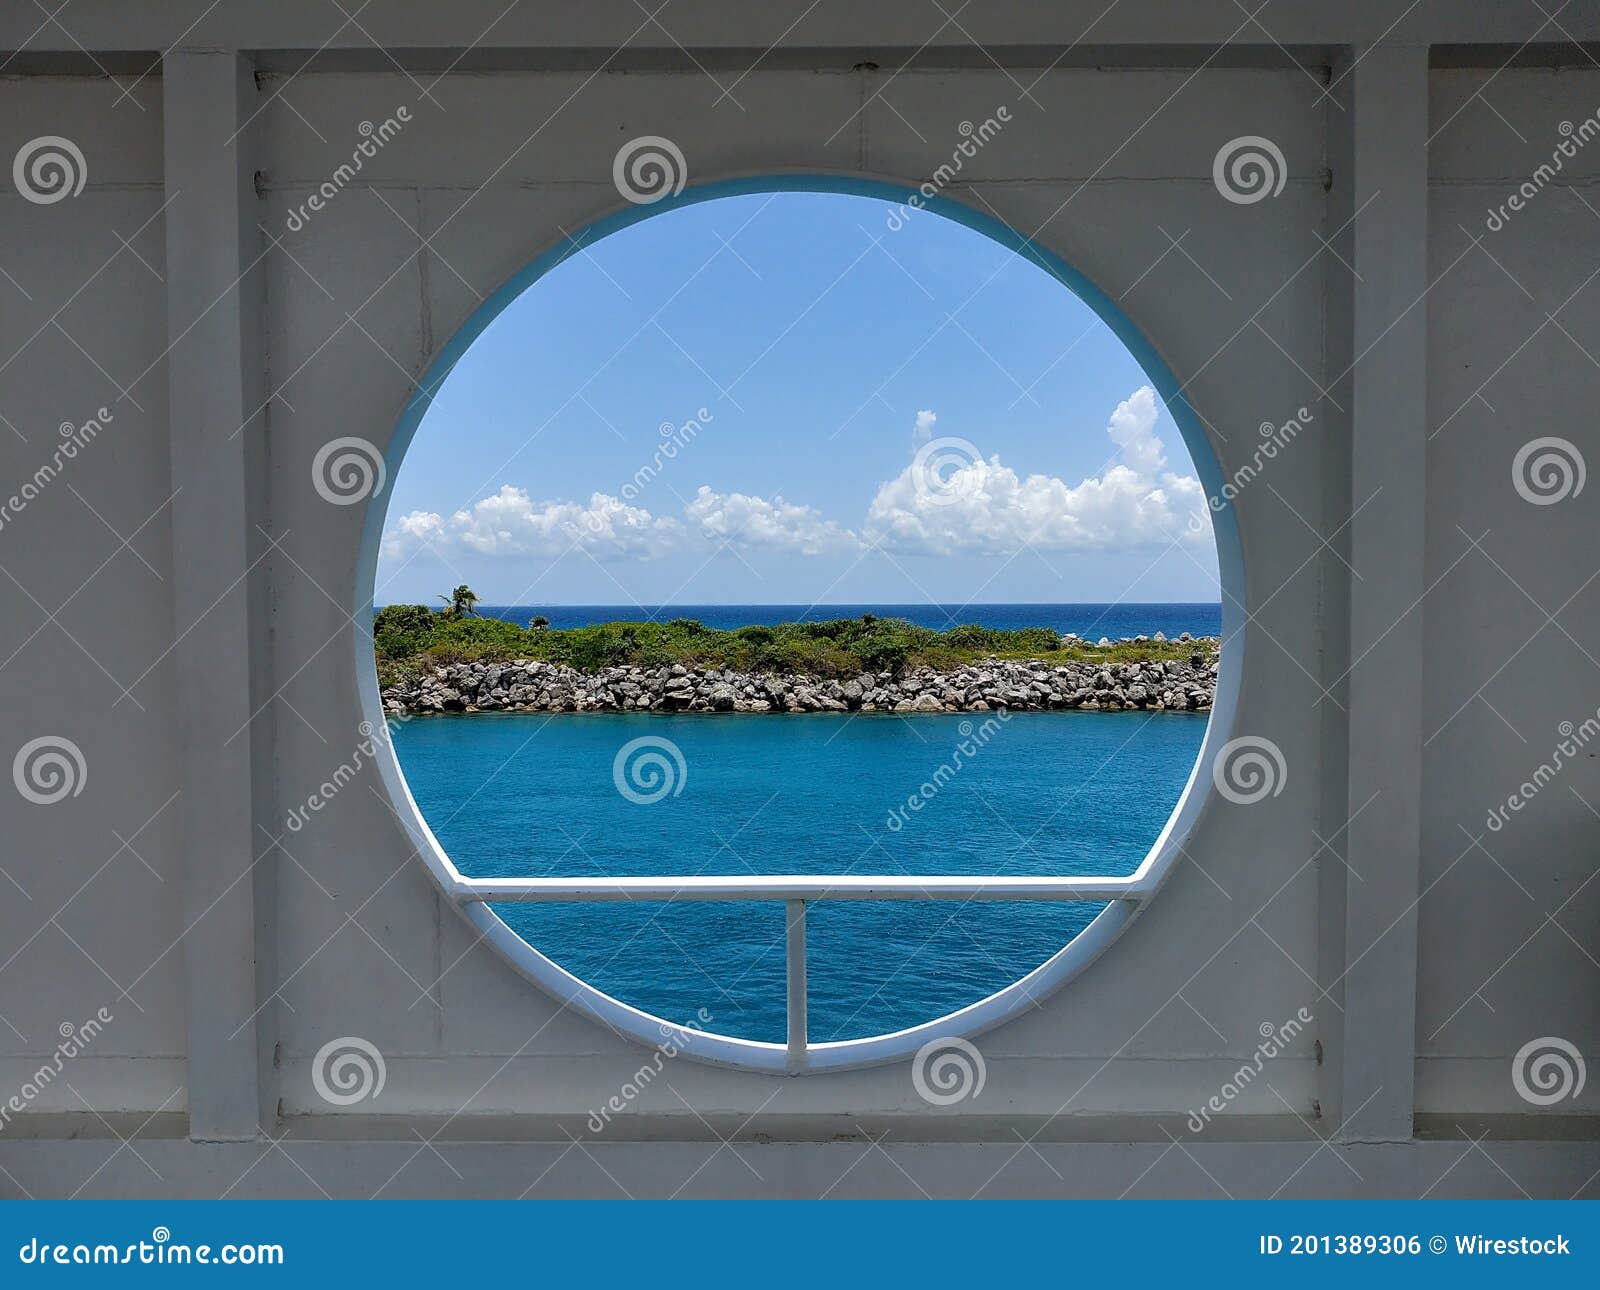 seaview from a boat in mexi